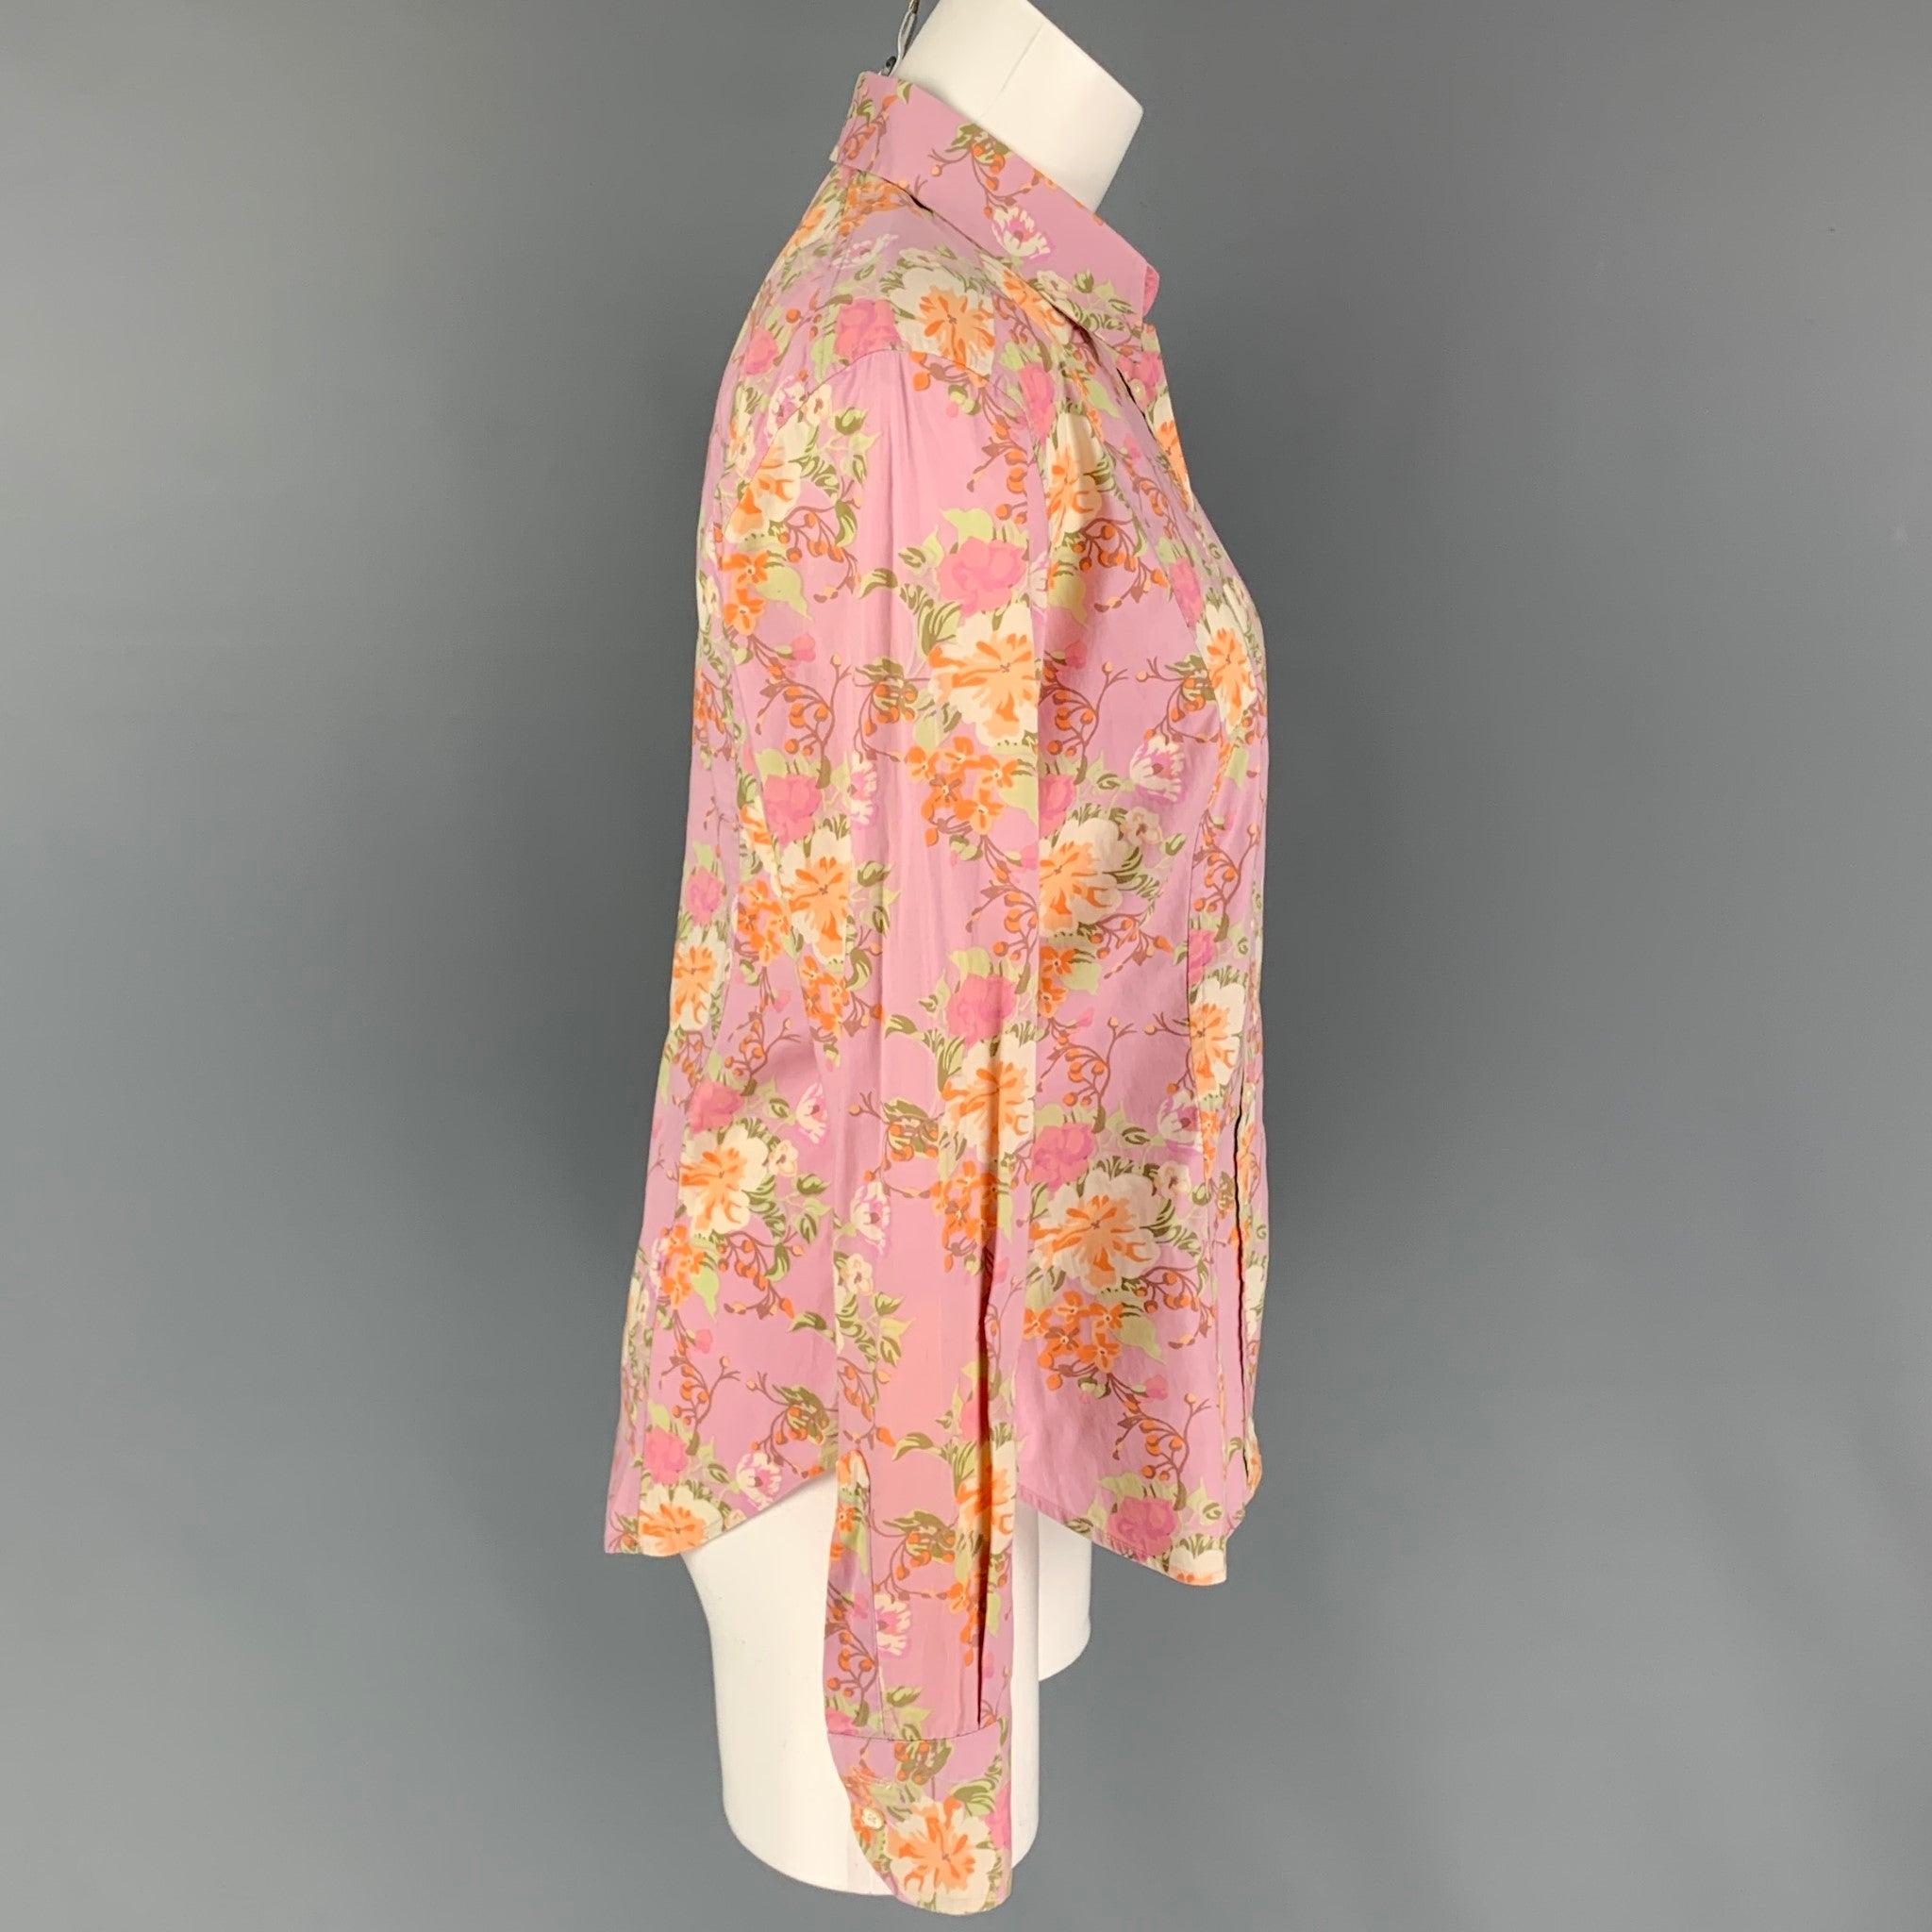 ETRO blouse comes in a lilac & orange floral cotton featuring a spread collar and a buttoned closure. Made in Italy.
 Very Good
 Pre-Owned Condition. Fabric tag removed.  
 

 Marked:  Size tag removed.  
 

 Measurements: 
  
 Shoulder: 16.5 inches